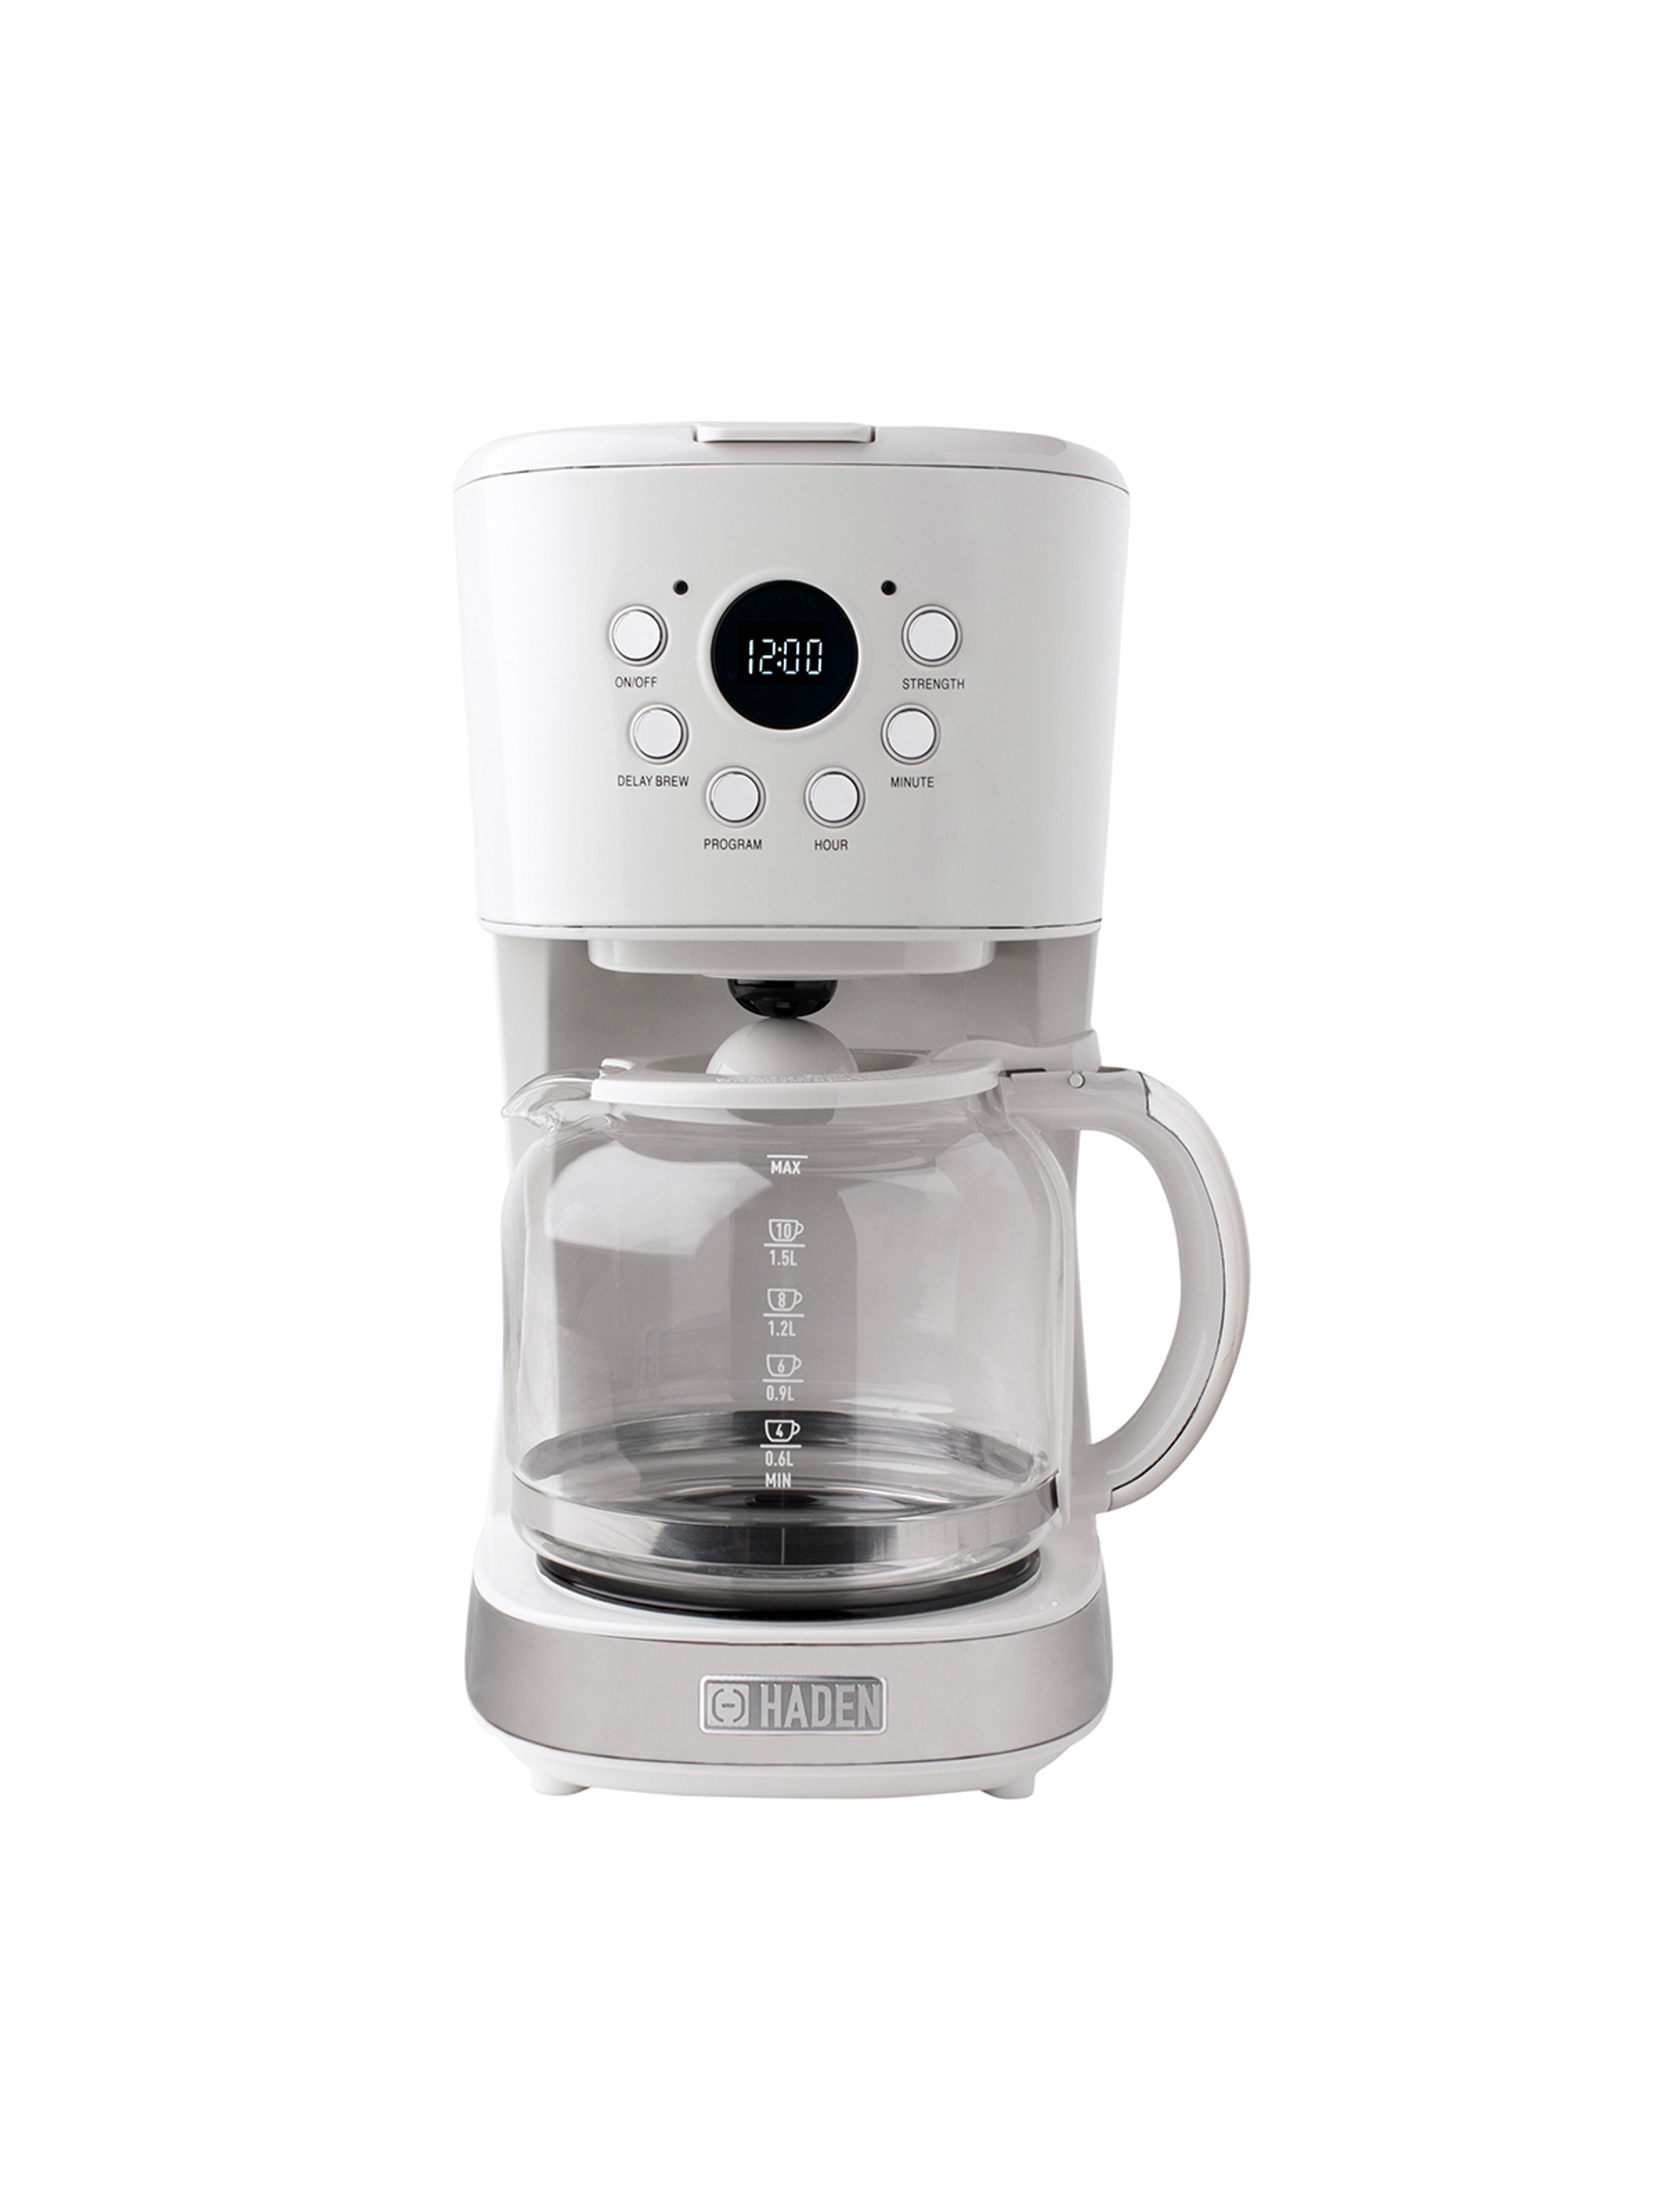 Haden Heritage 12-cup Programmable Coffee Maker In White